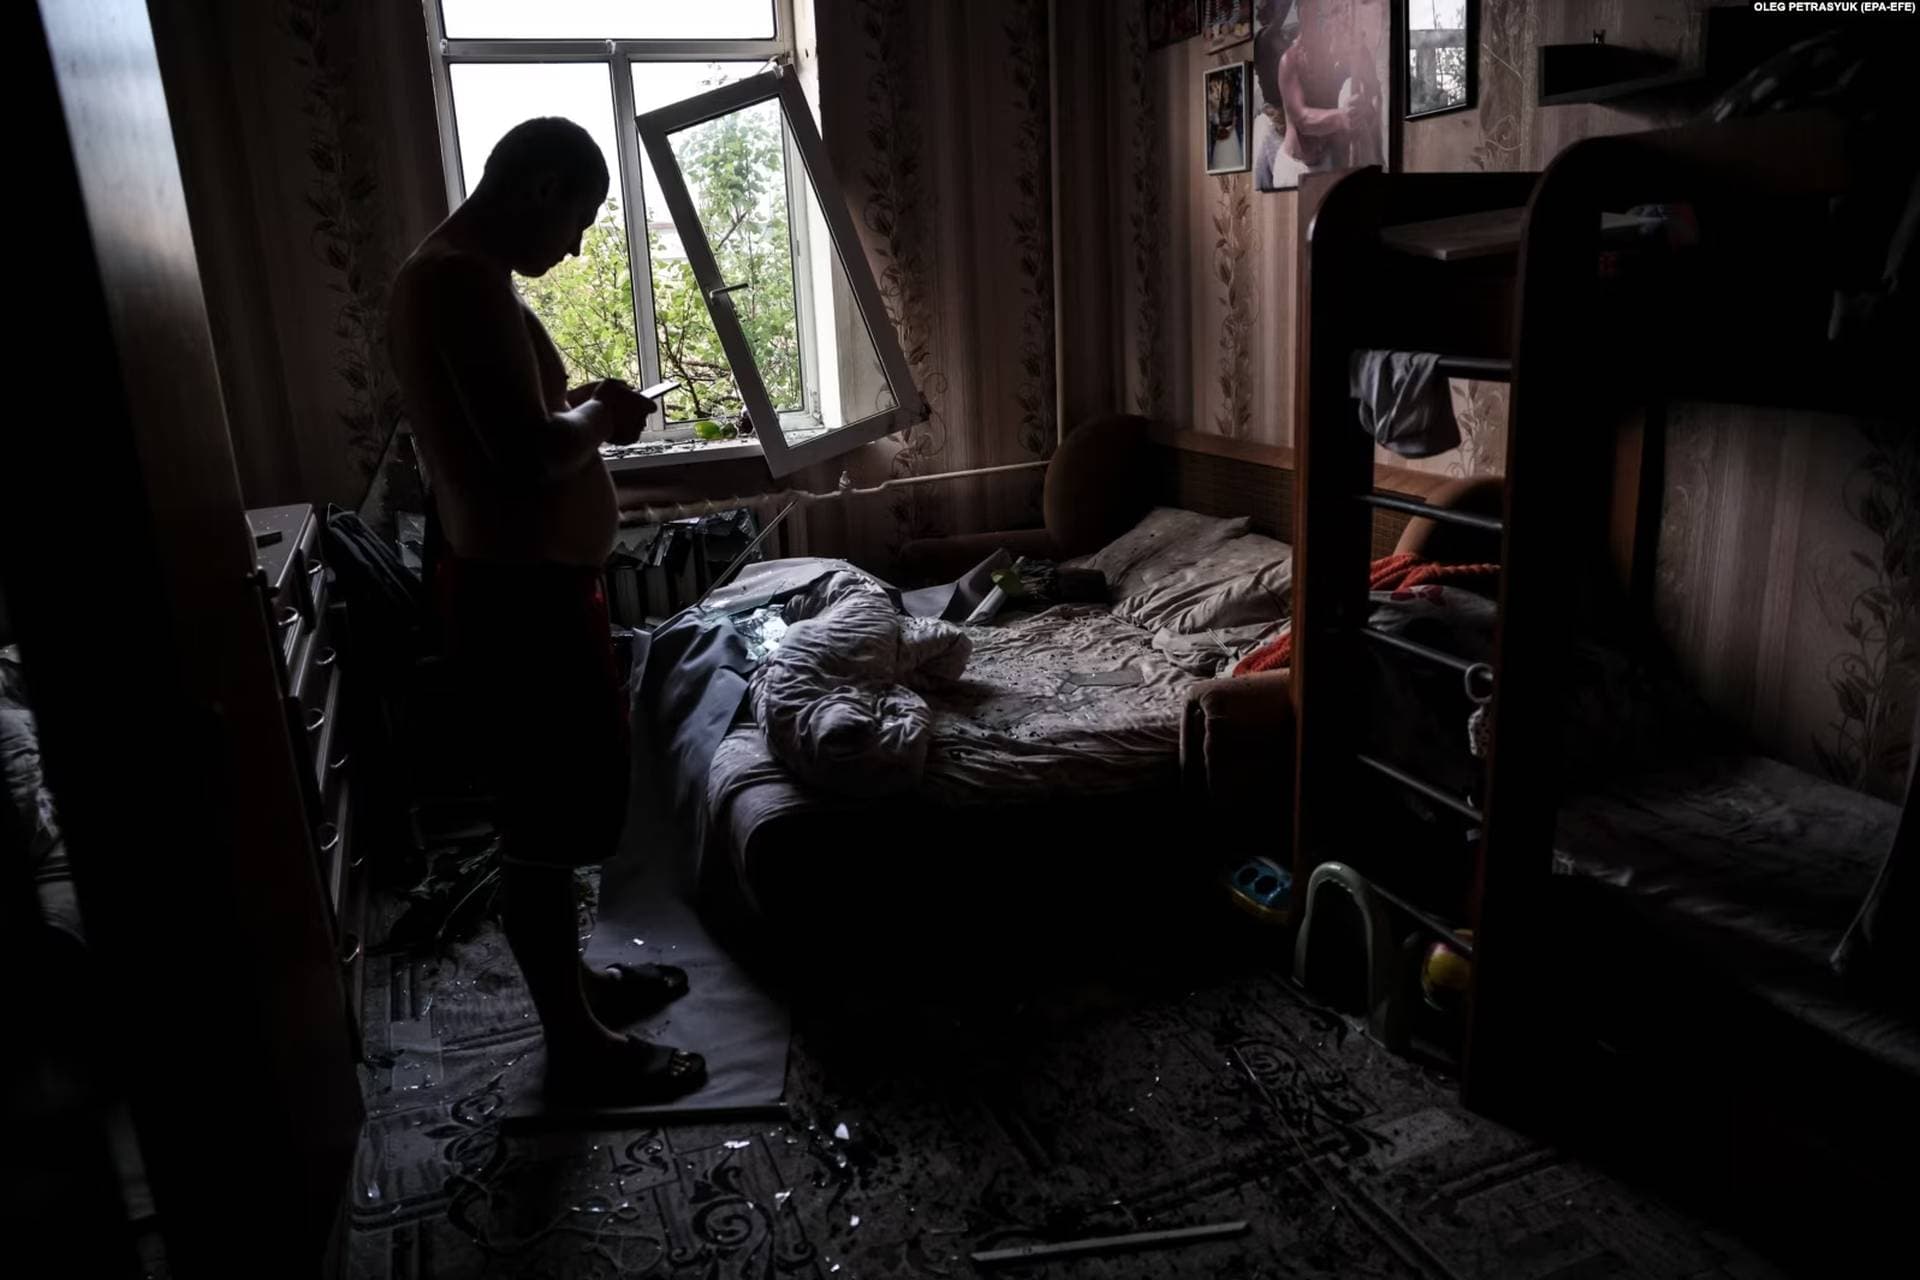 Kyiv resident checks his phone after surveying the damage inside his flat